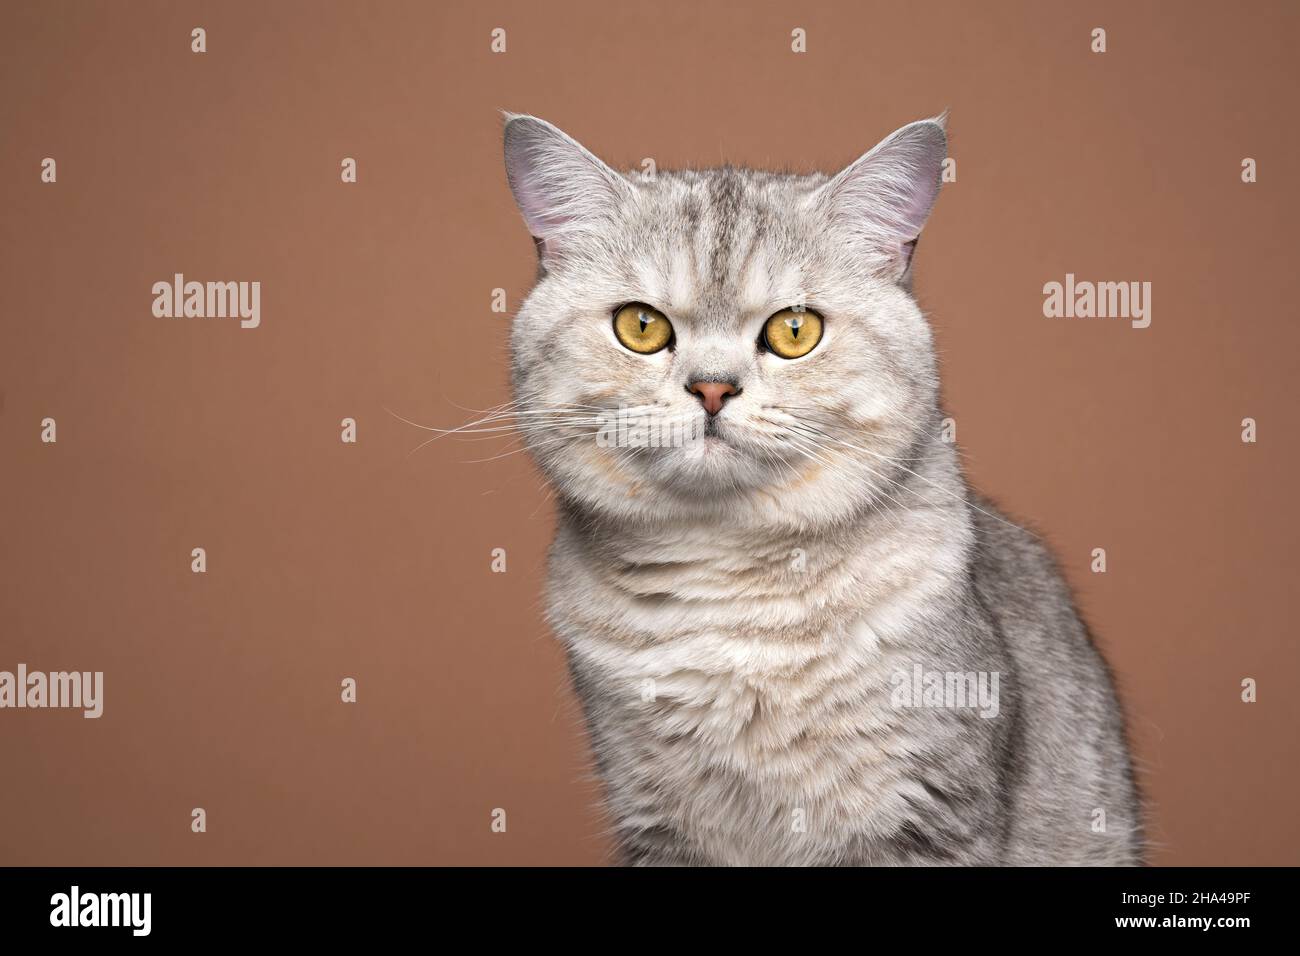 fluffy silver shaded tabby british shorthair cat portrait on brown background with copy space Stock Photo